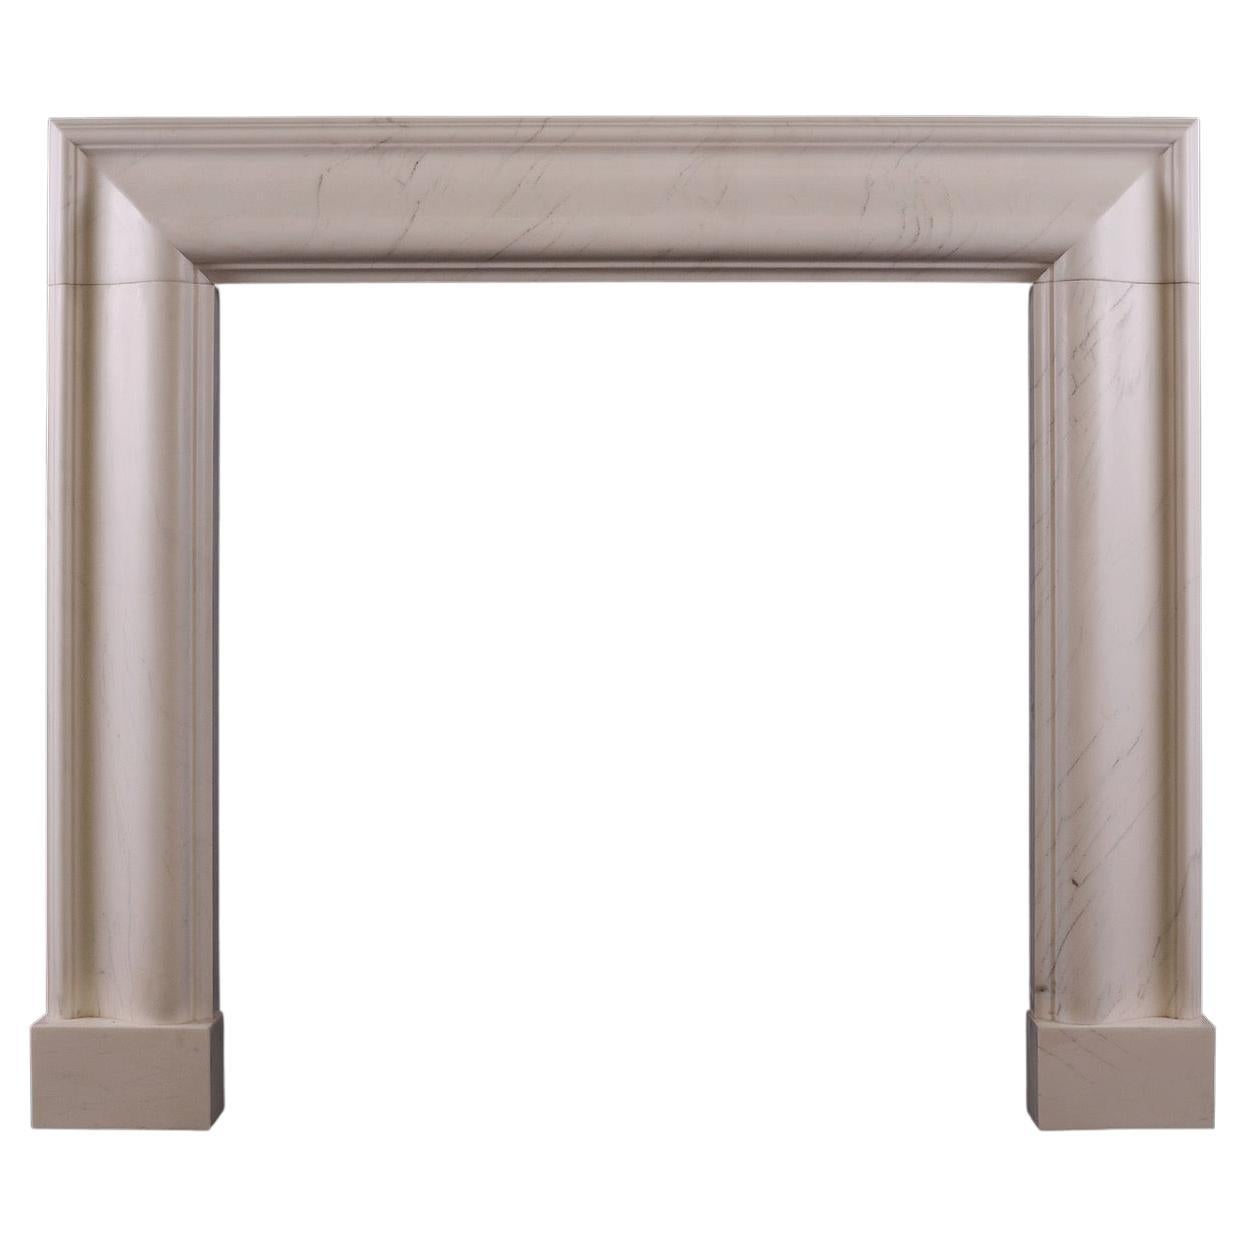 An English Bolection Fireplace in Venato Light Stone For Sale